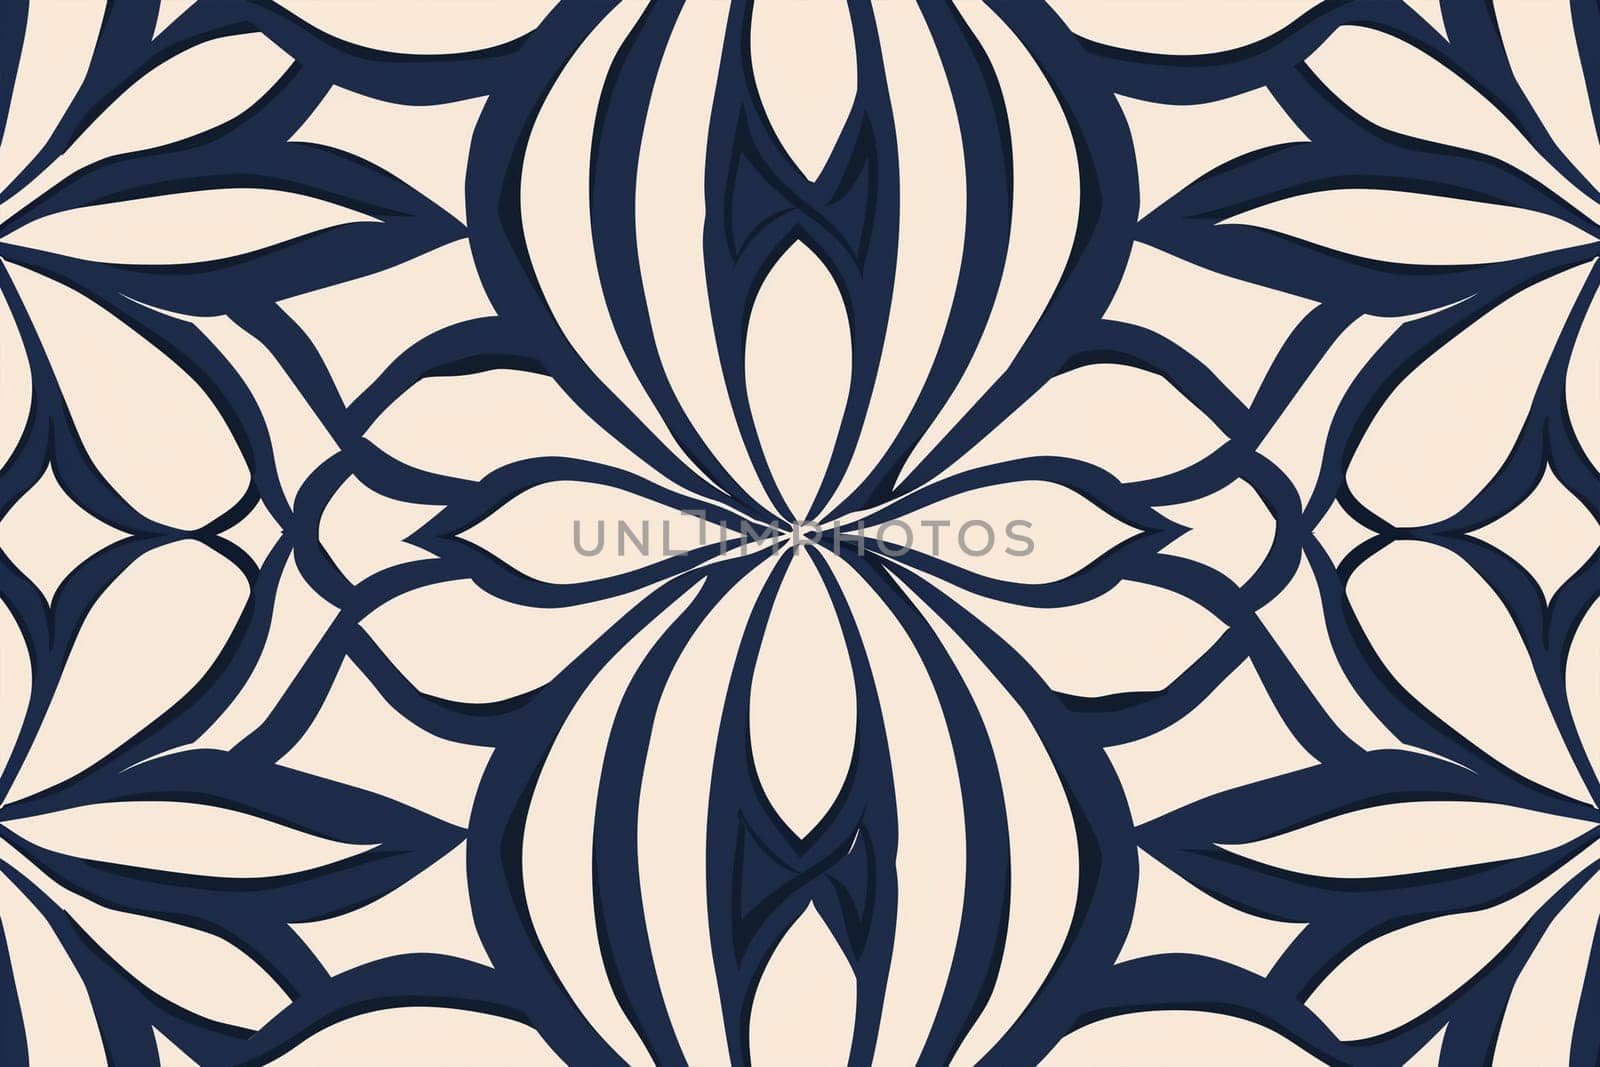 A wallpaper featuring a pattern of blue and white colors with intricate flower designs.